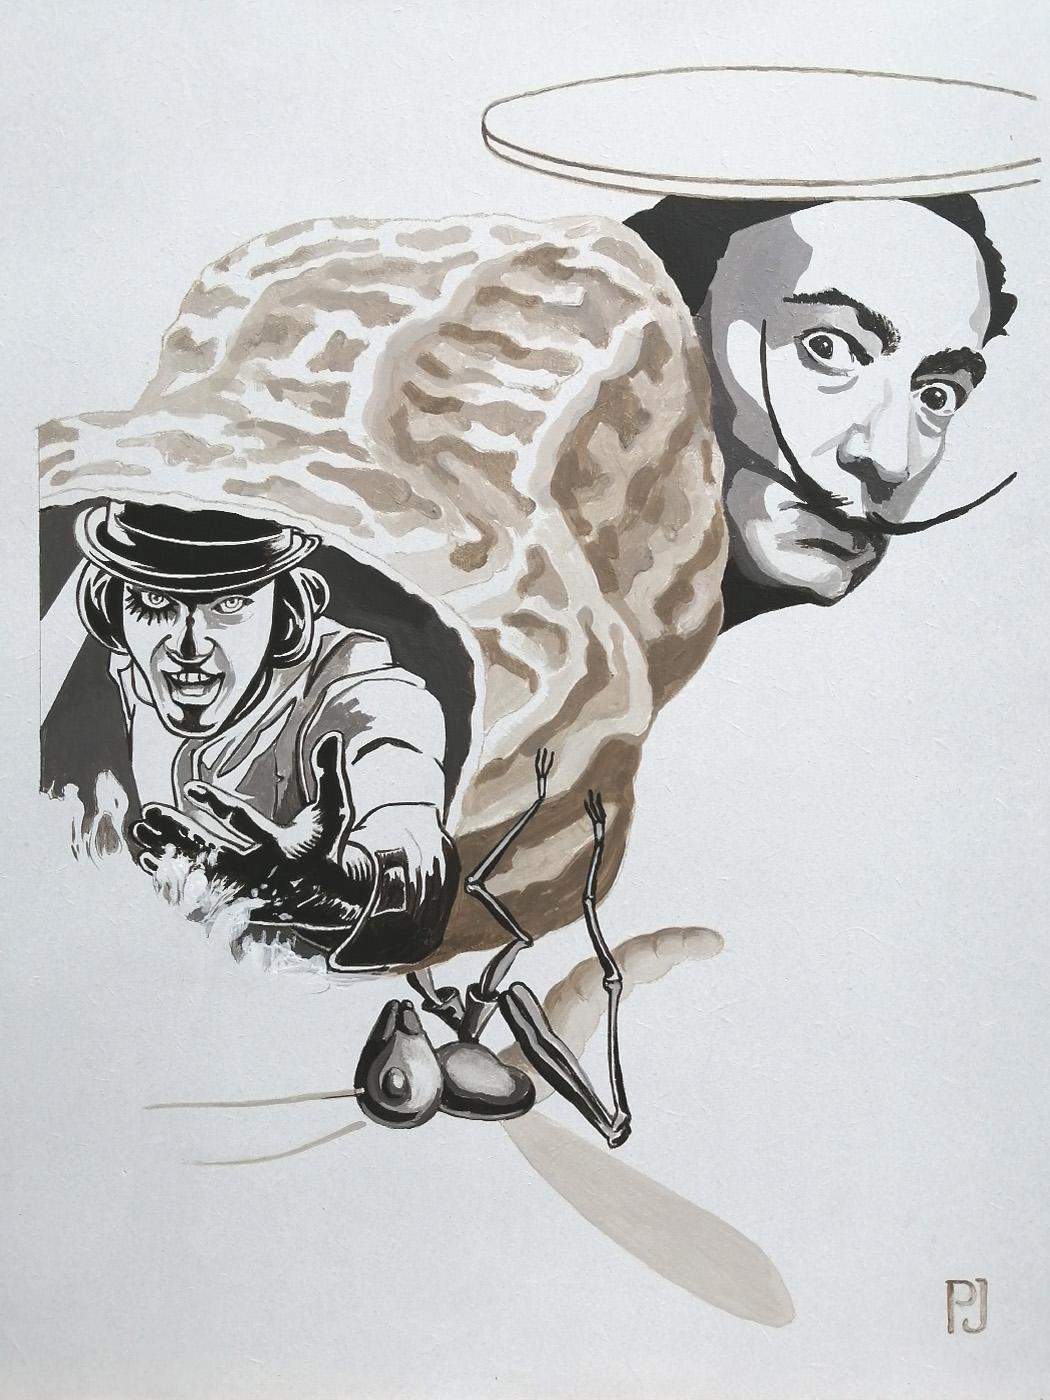 Pierre Jacob - Clockwork peanut
Technical Description: Acrylic paint on wood support, thickness = 6mm 
Dimensions : 40 x 30 cm
2020
Description : 
Malcolm Mcdowell (Alex), emerges from a disemboweled peanut shell. In the background, a portrait of